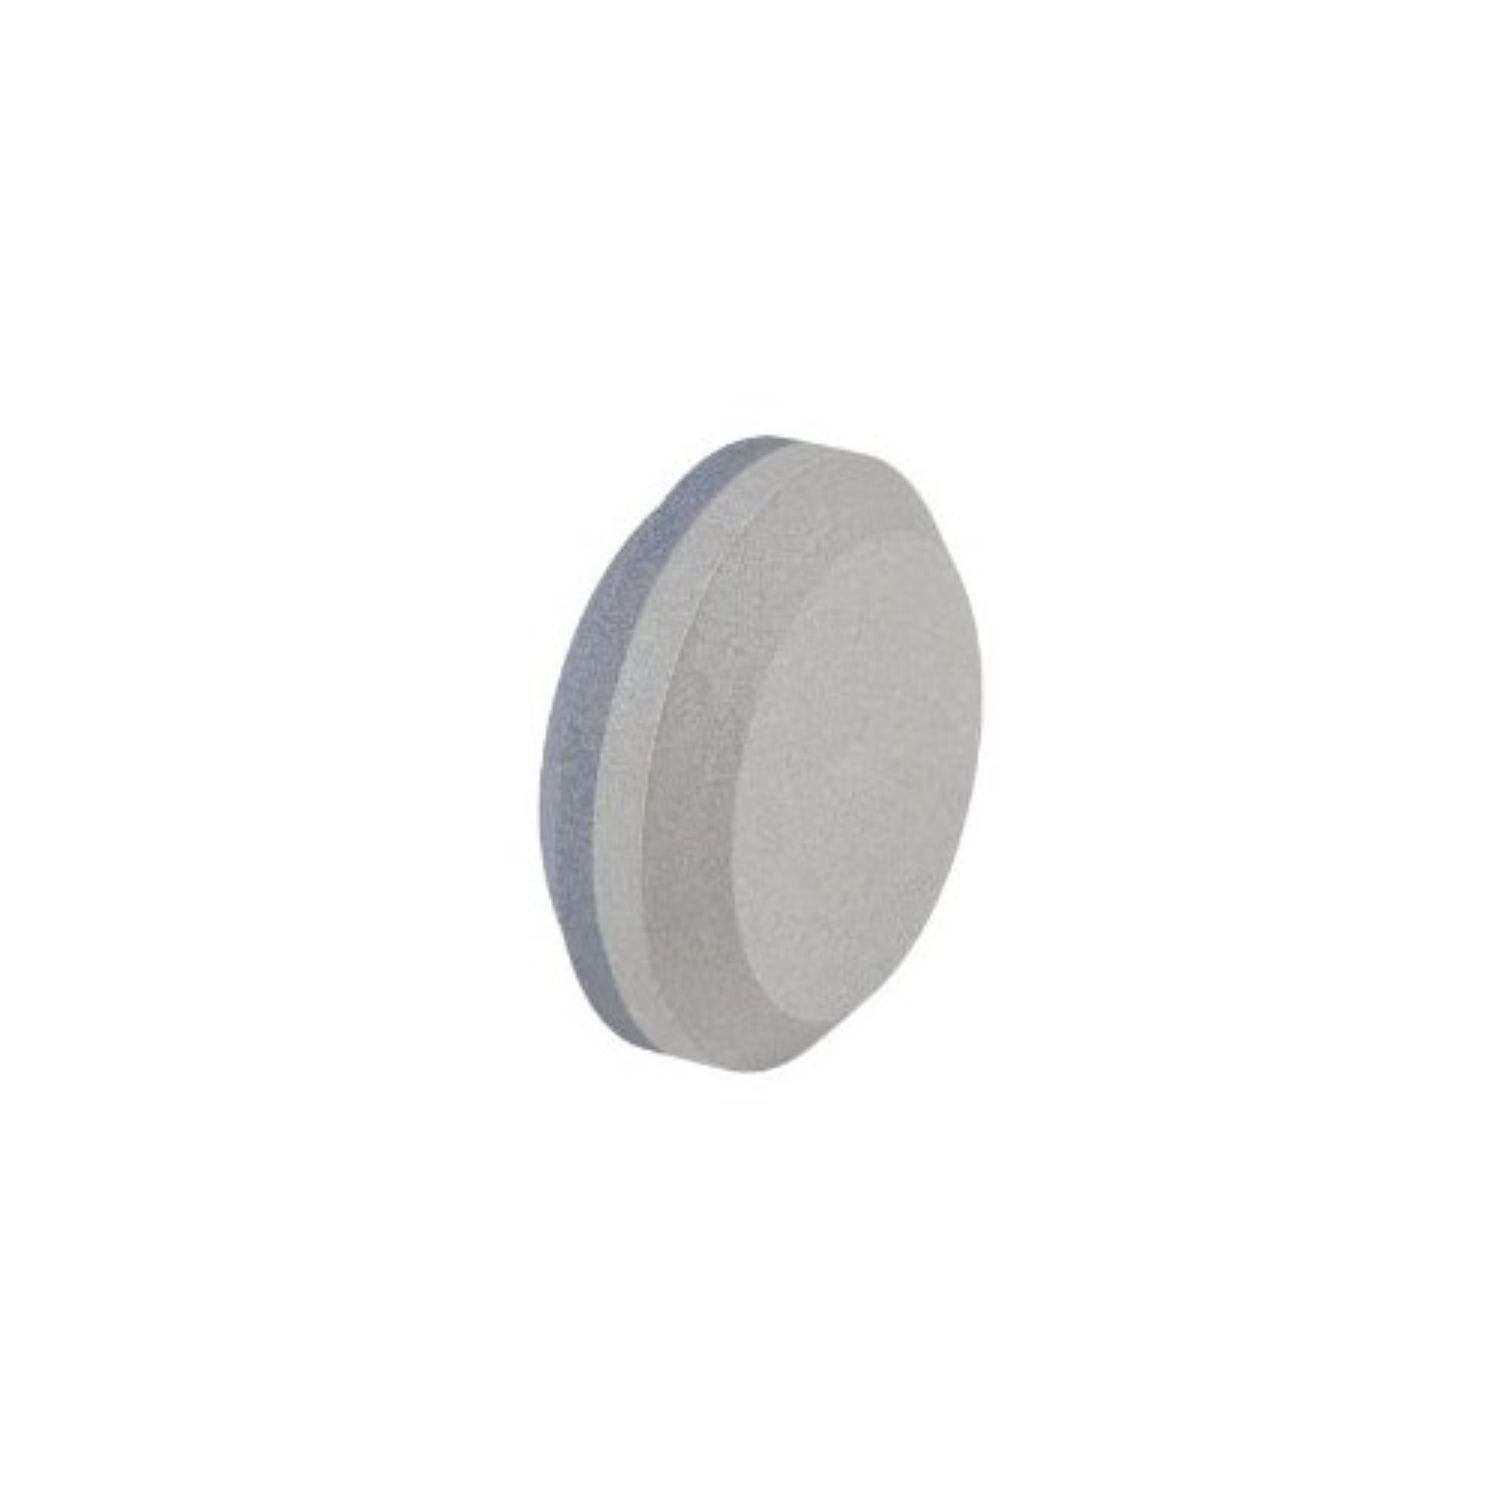 New In Stock 2-Sided Coarse/Fine Wetterlings Grinding Sharpening Stone Puck 